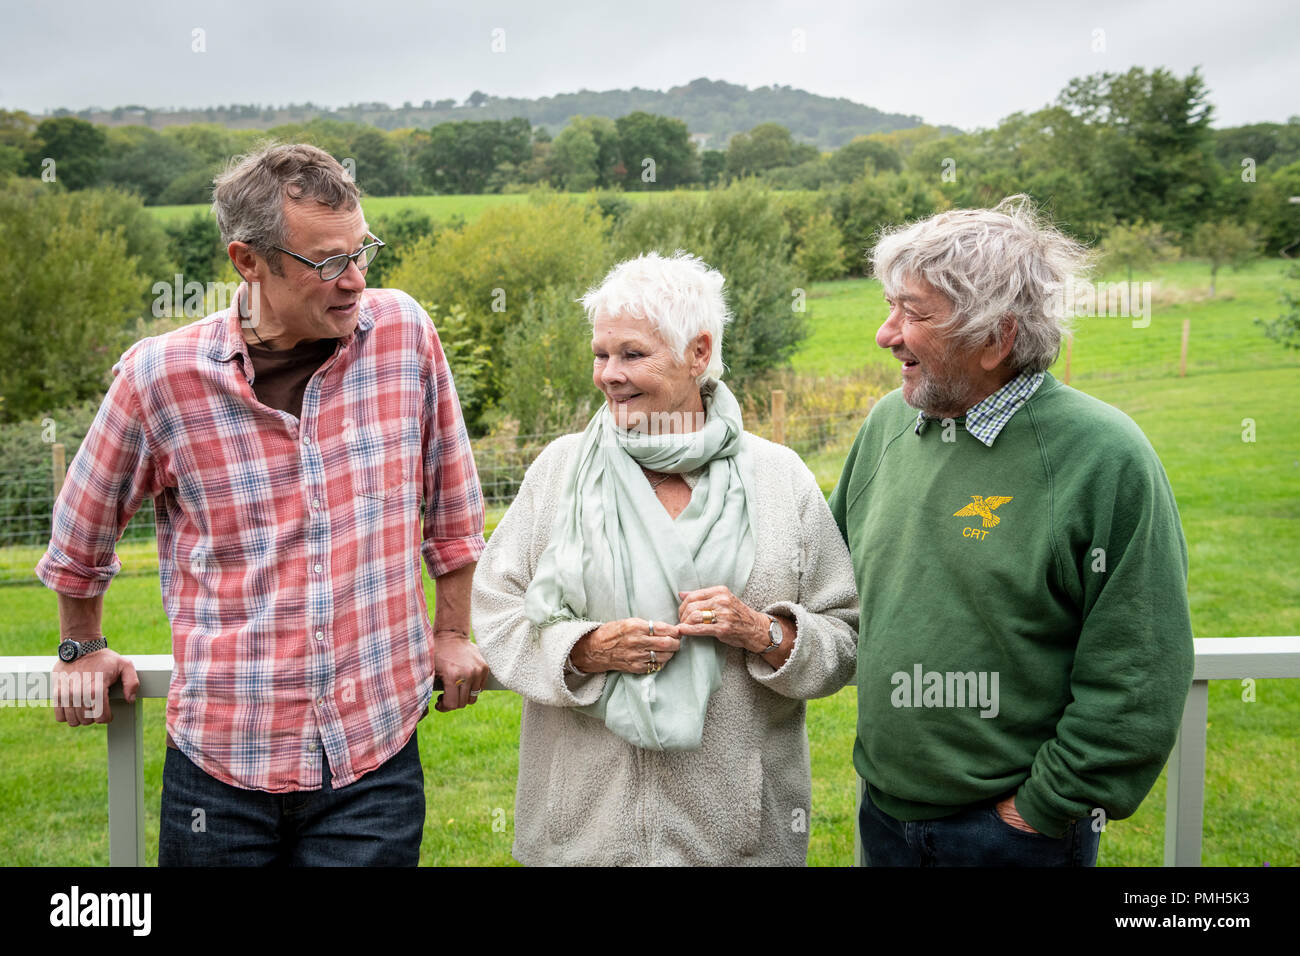 Babers Farm, Marshwood, Dorset UK 18th September 2018. Dame Judi Dench (Trust Patron), Hugh Fearnley-Whittingstall and Robin Page (Trust Chairman) meet at the Countryside Restoration Trust Farm. This was one of several events marking the 25th Anniversary of the Trust whose aim is for conservation improvements to be carried out alongside practical farming and land management. Credit: Julian Eales/Alamy Live News Stock Photo